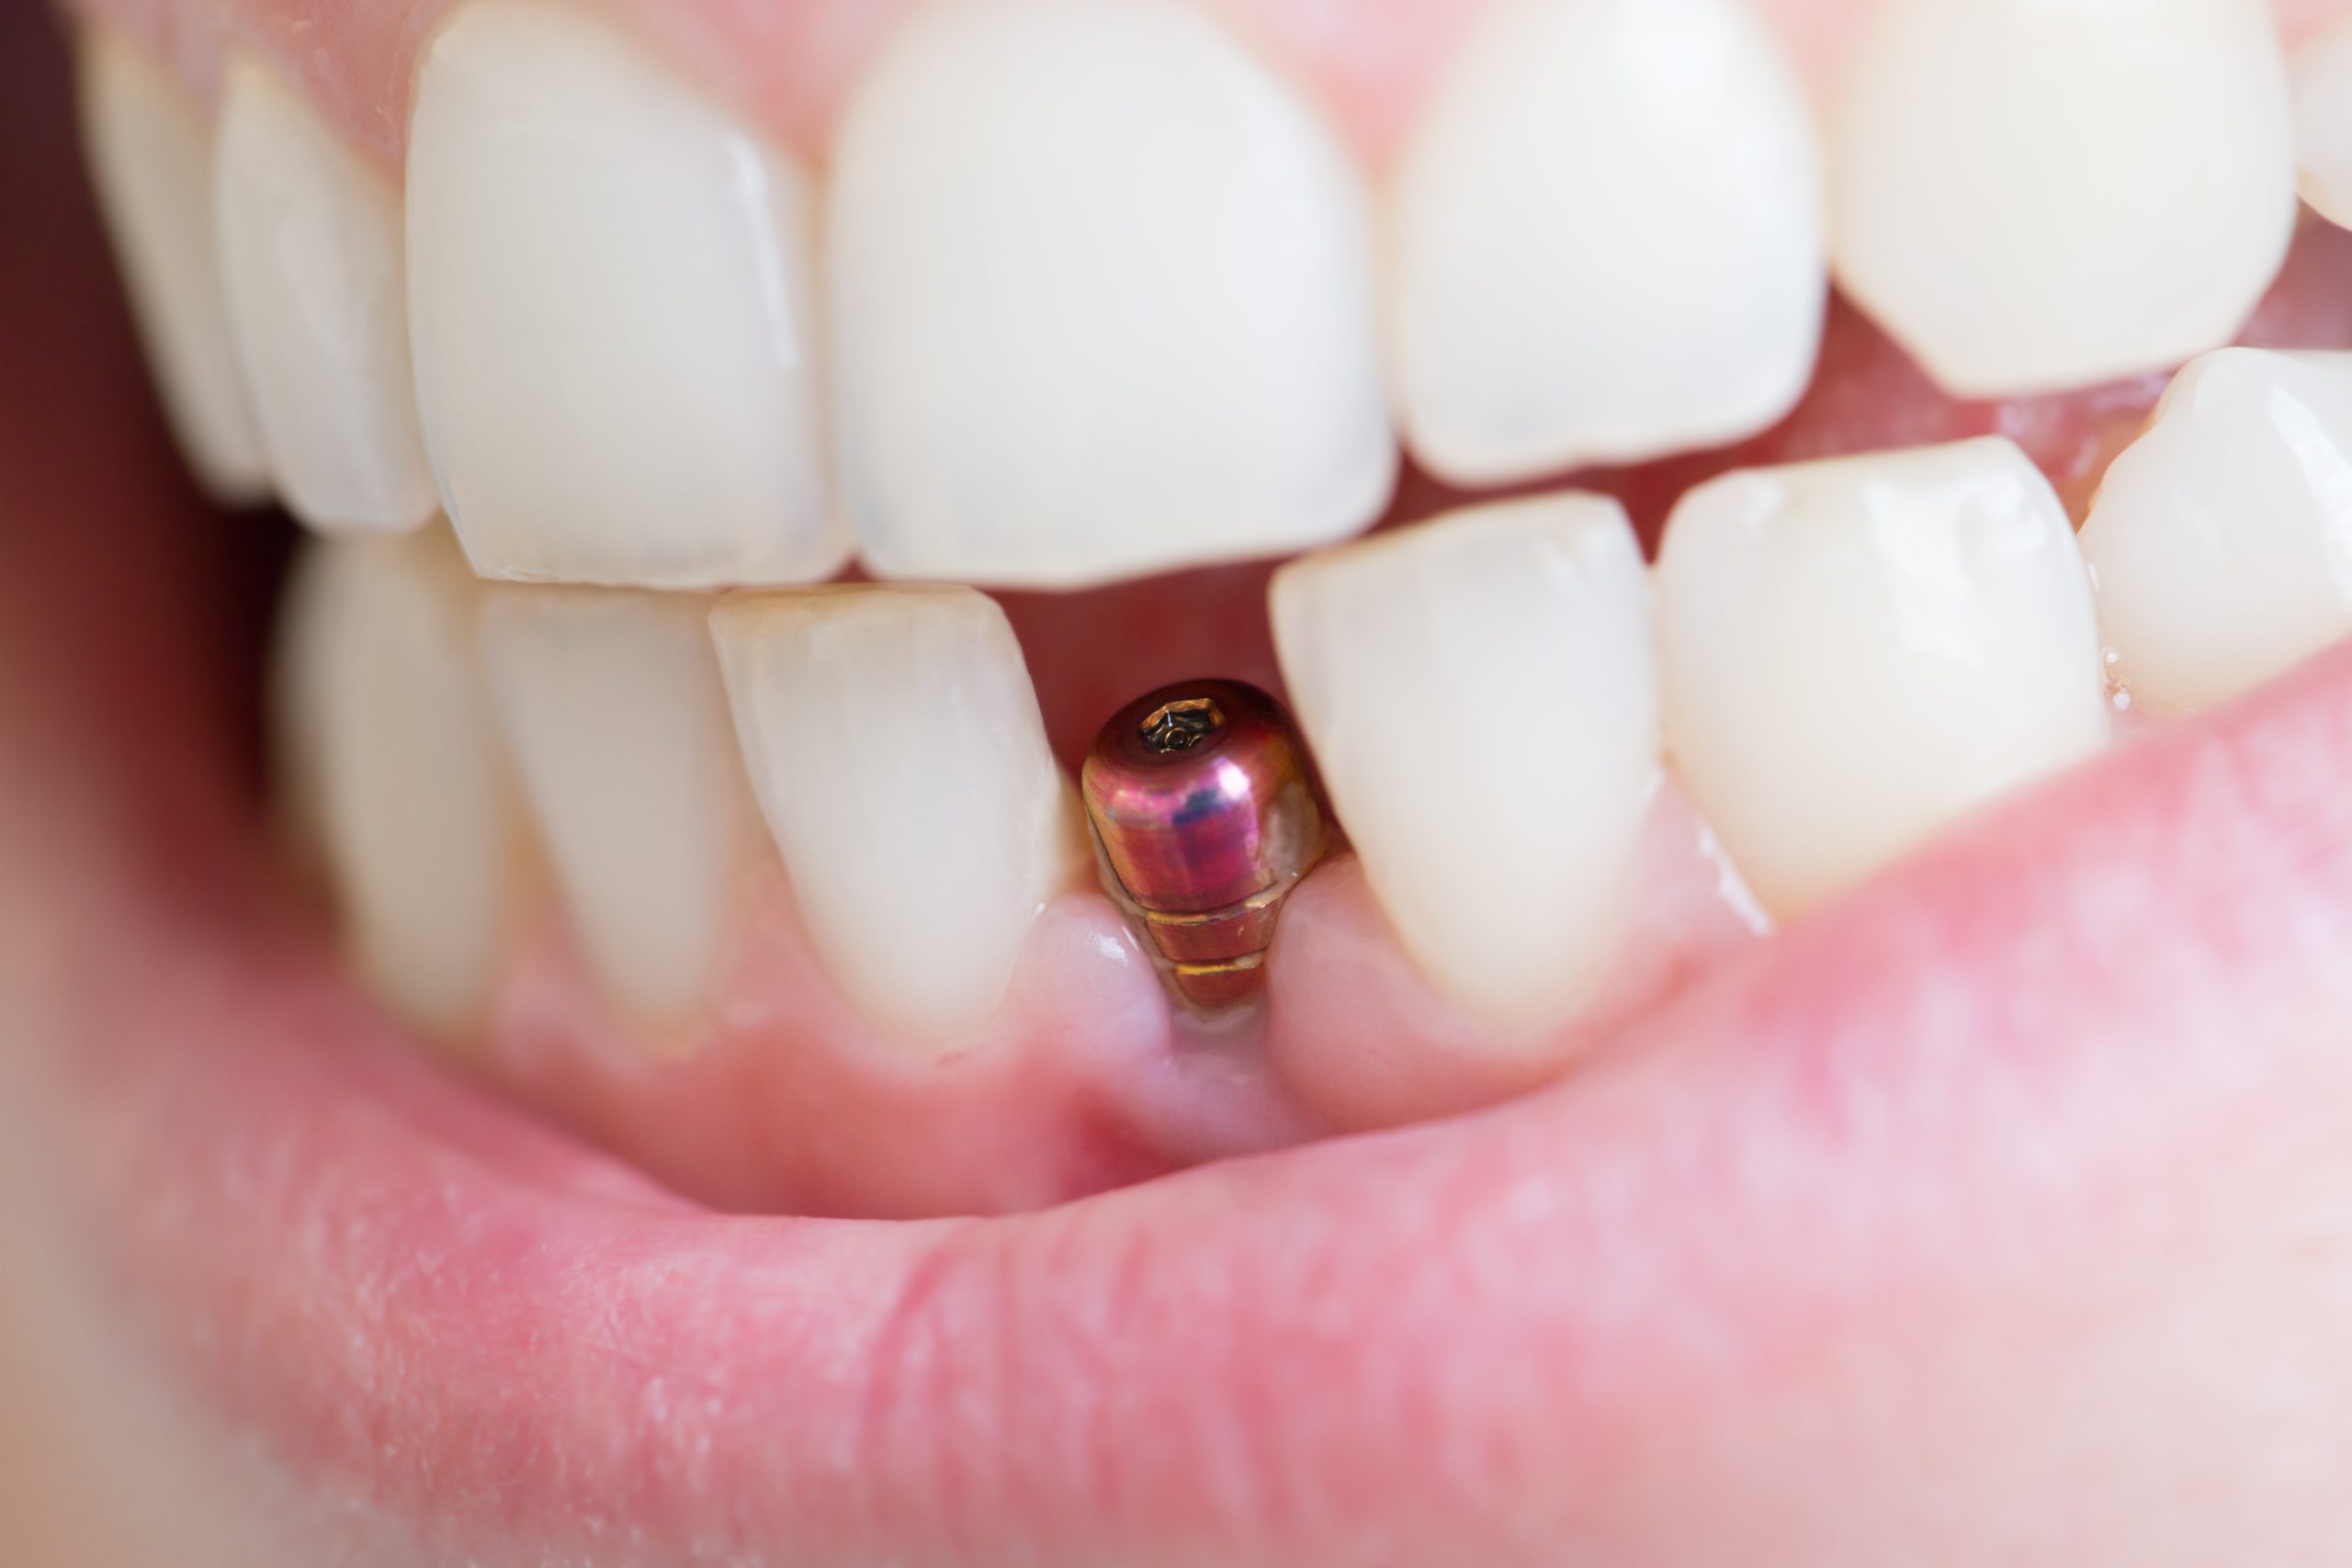 Dental implant to replace missing tooth